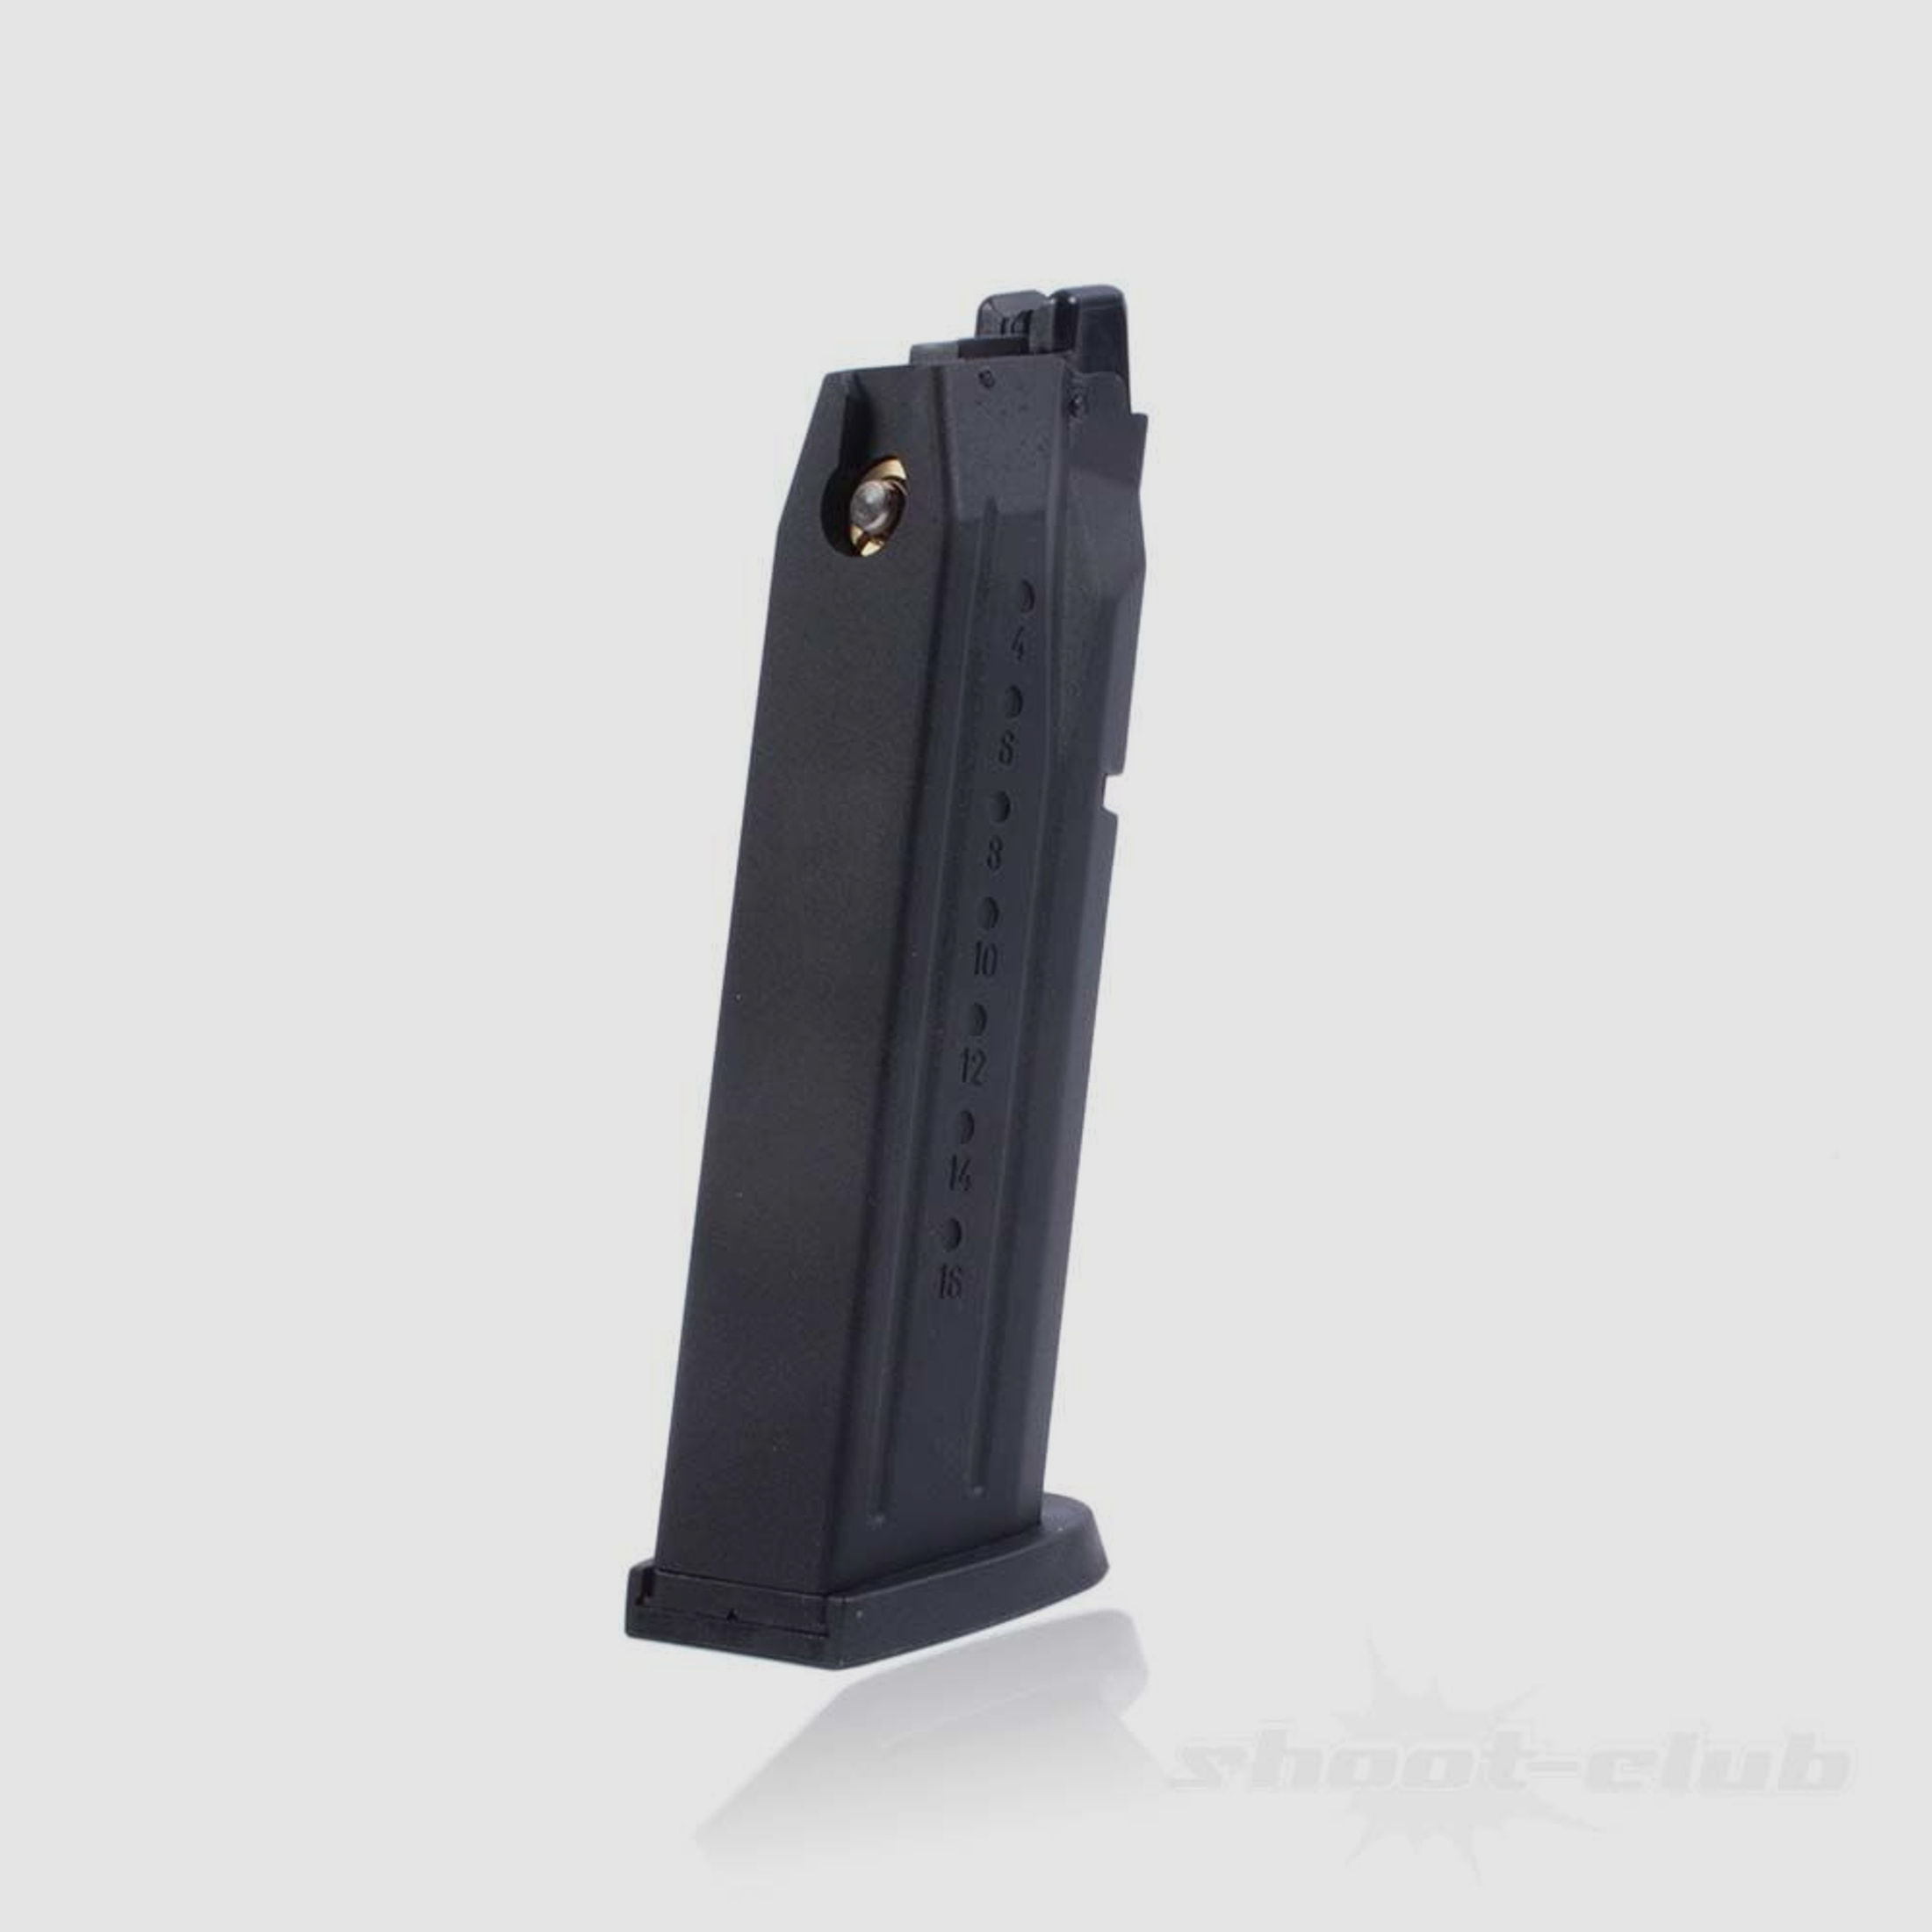 Smith & Wesson M&P9 Performance Center Magazin Kal. 6mm